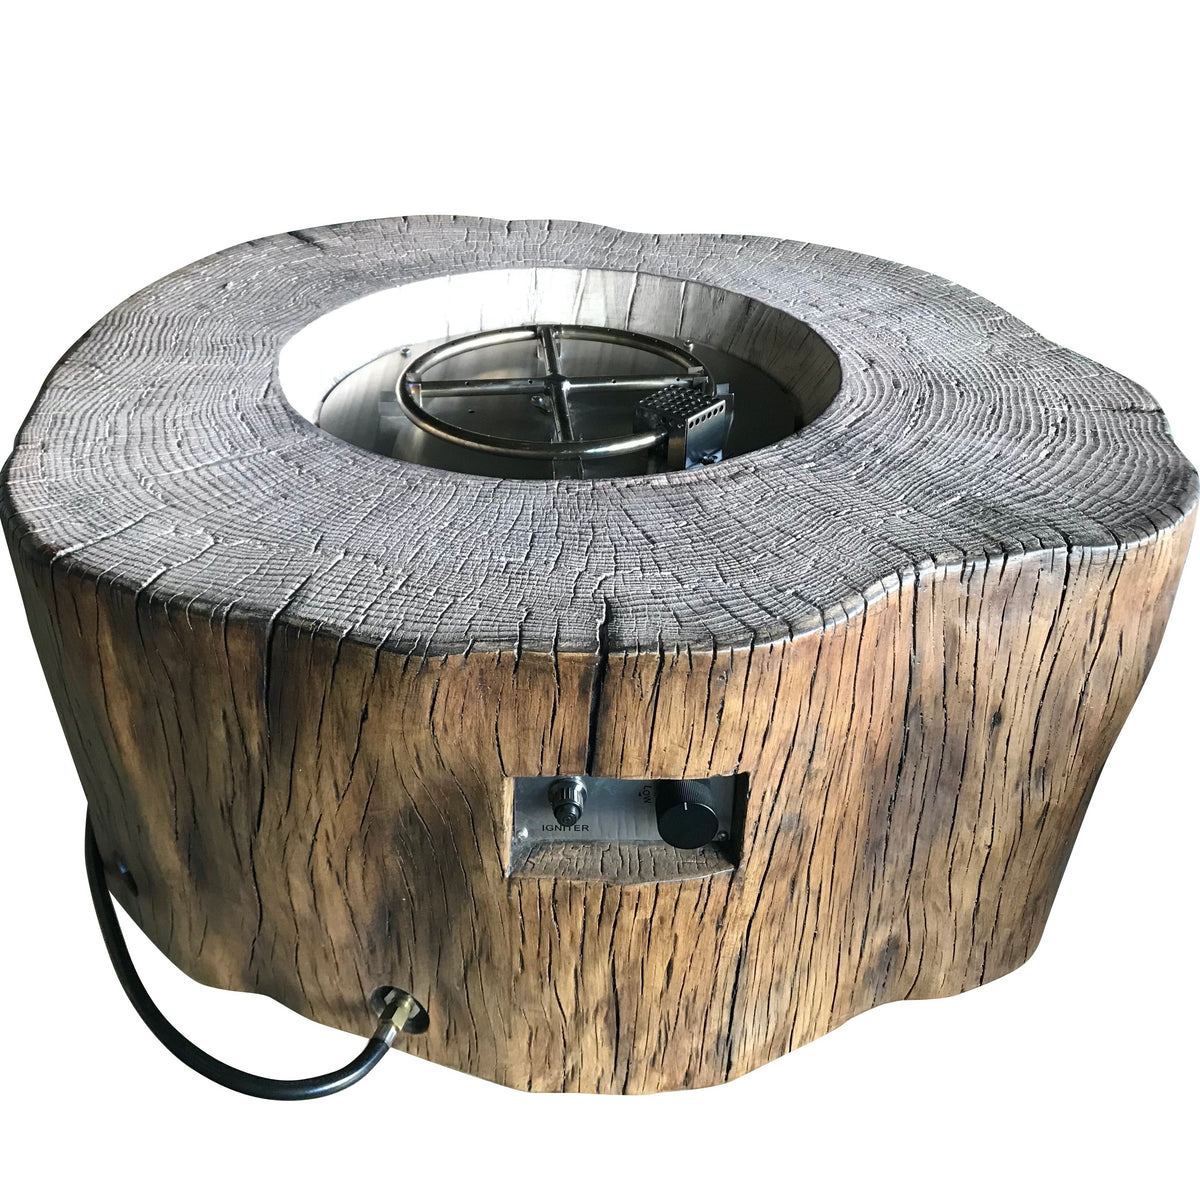 Elementi Manchester Fire Pit Table in Red Wood burner ring and switch